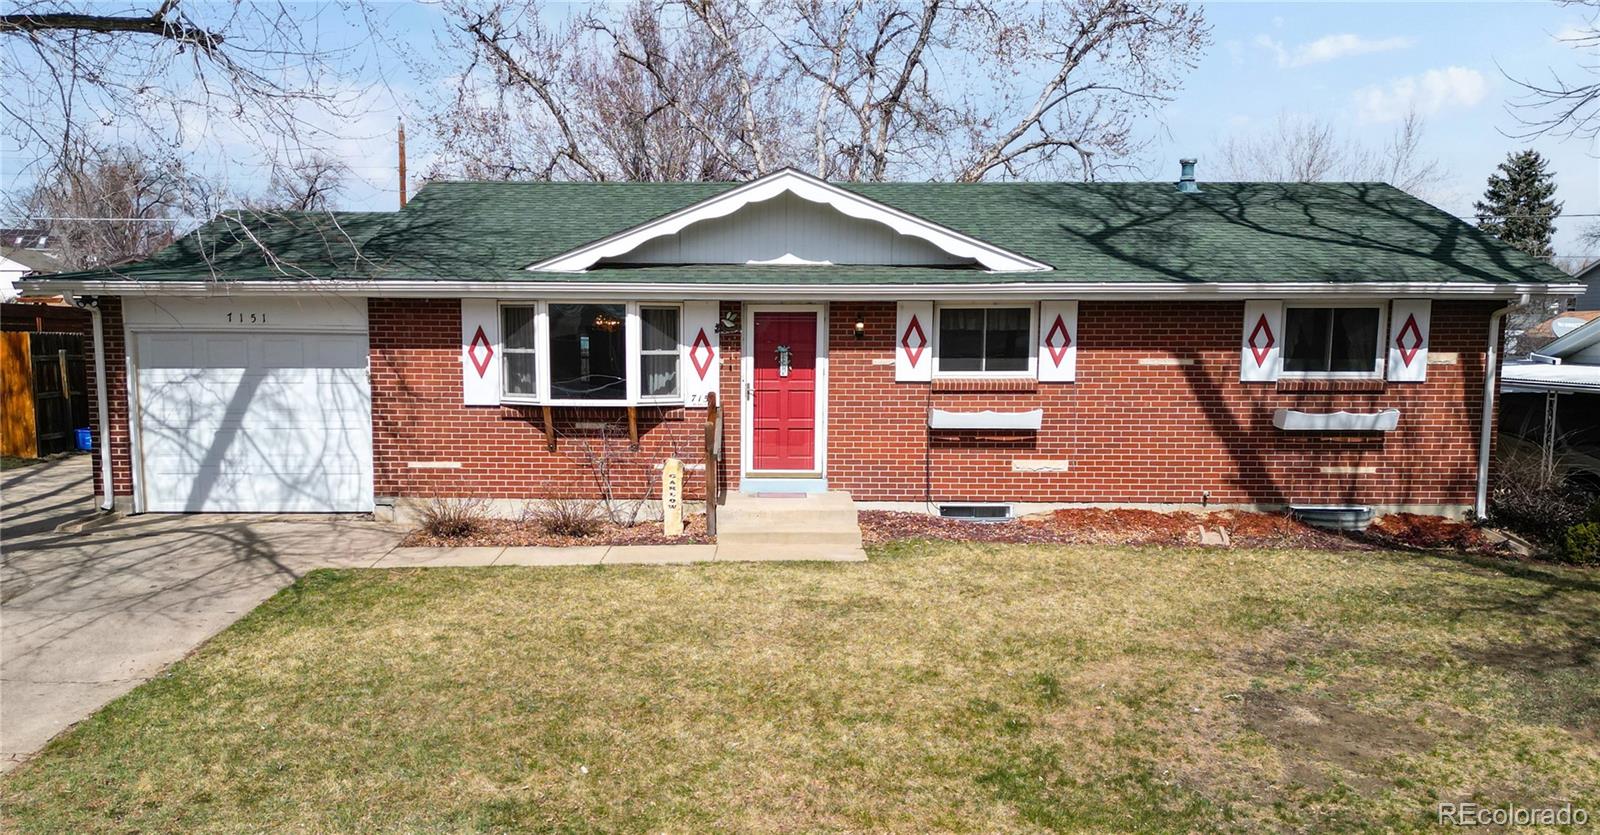 7151 w 75th place, arvada sold home. Closed on 2024-04-12 for $516,500.